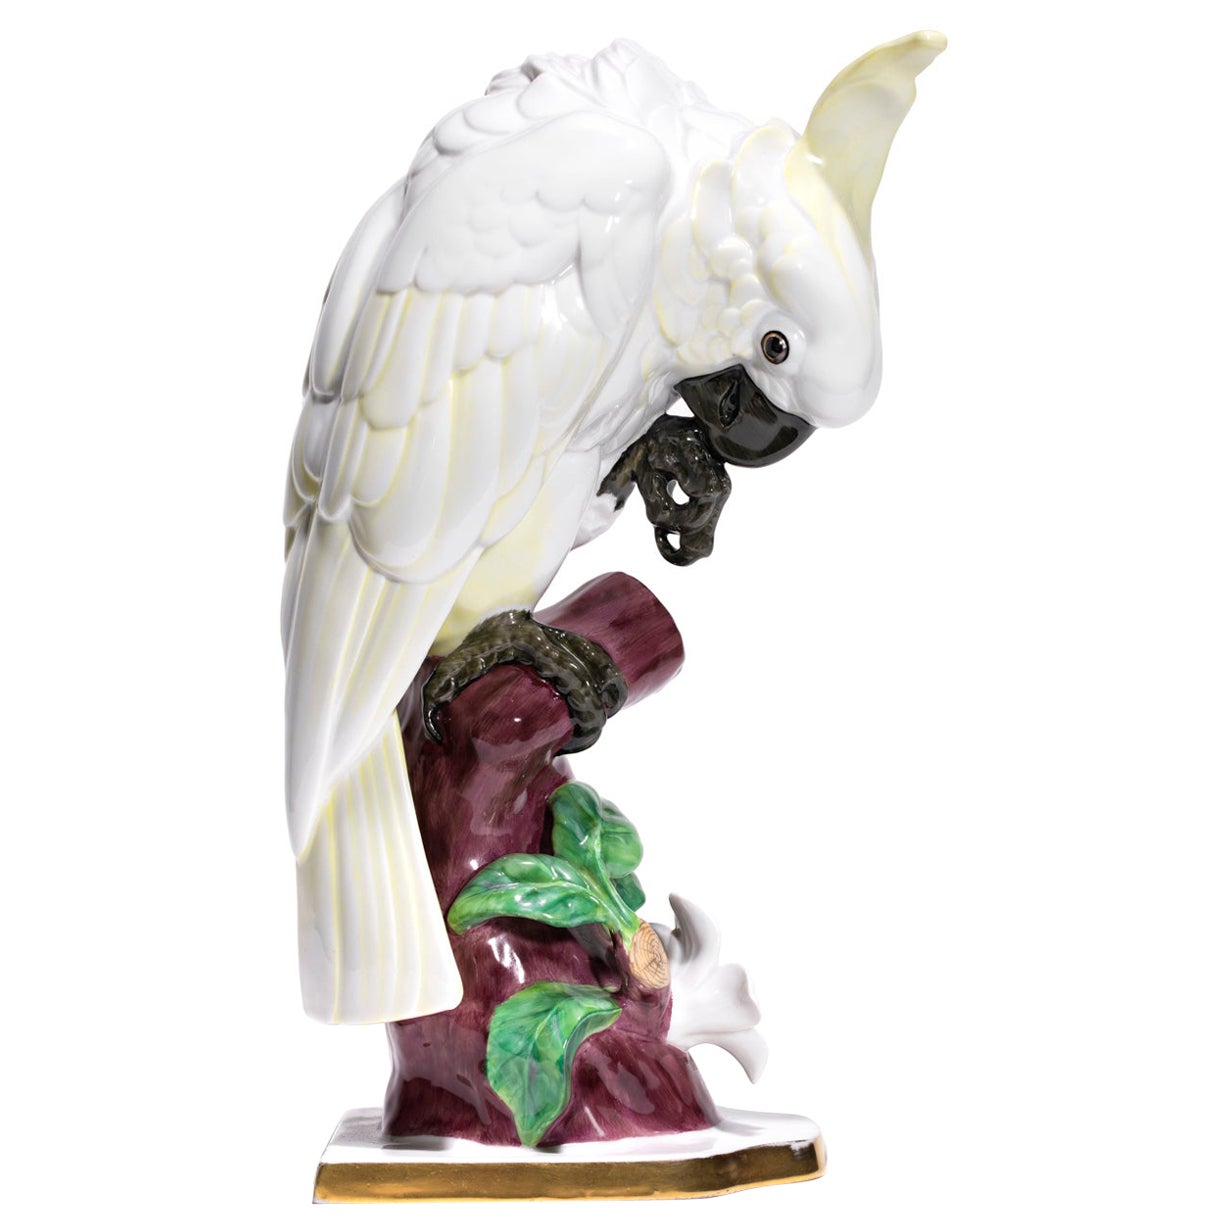 Hutschenreuther-Selb Porcelain Figurine "COCKATOO" Marked 01 on Base For Sale